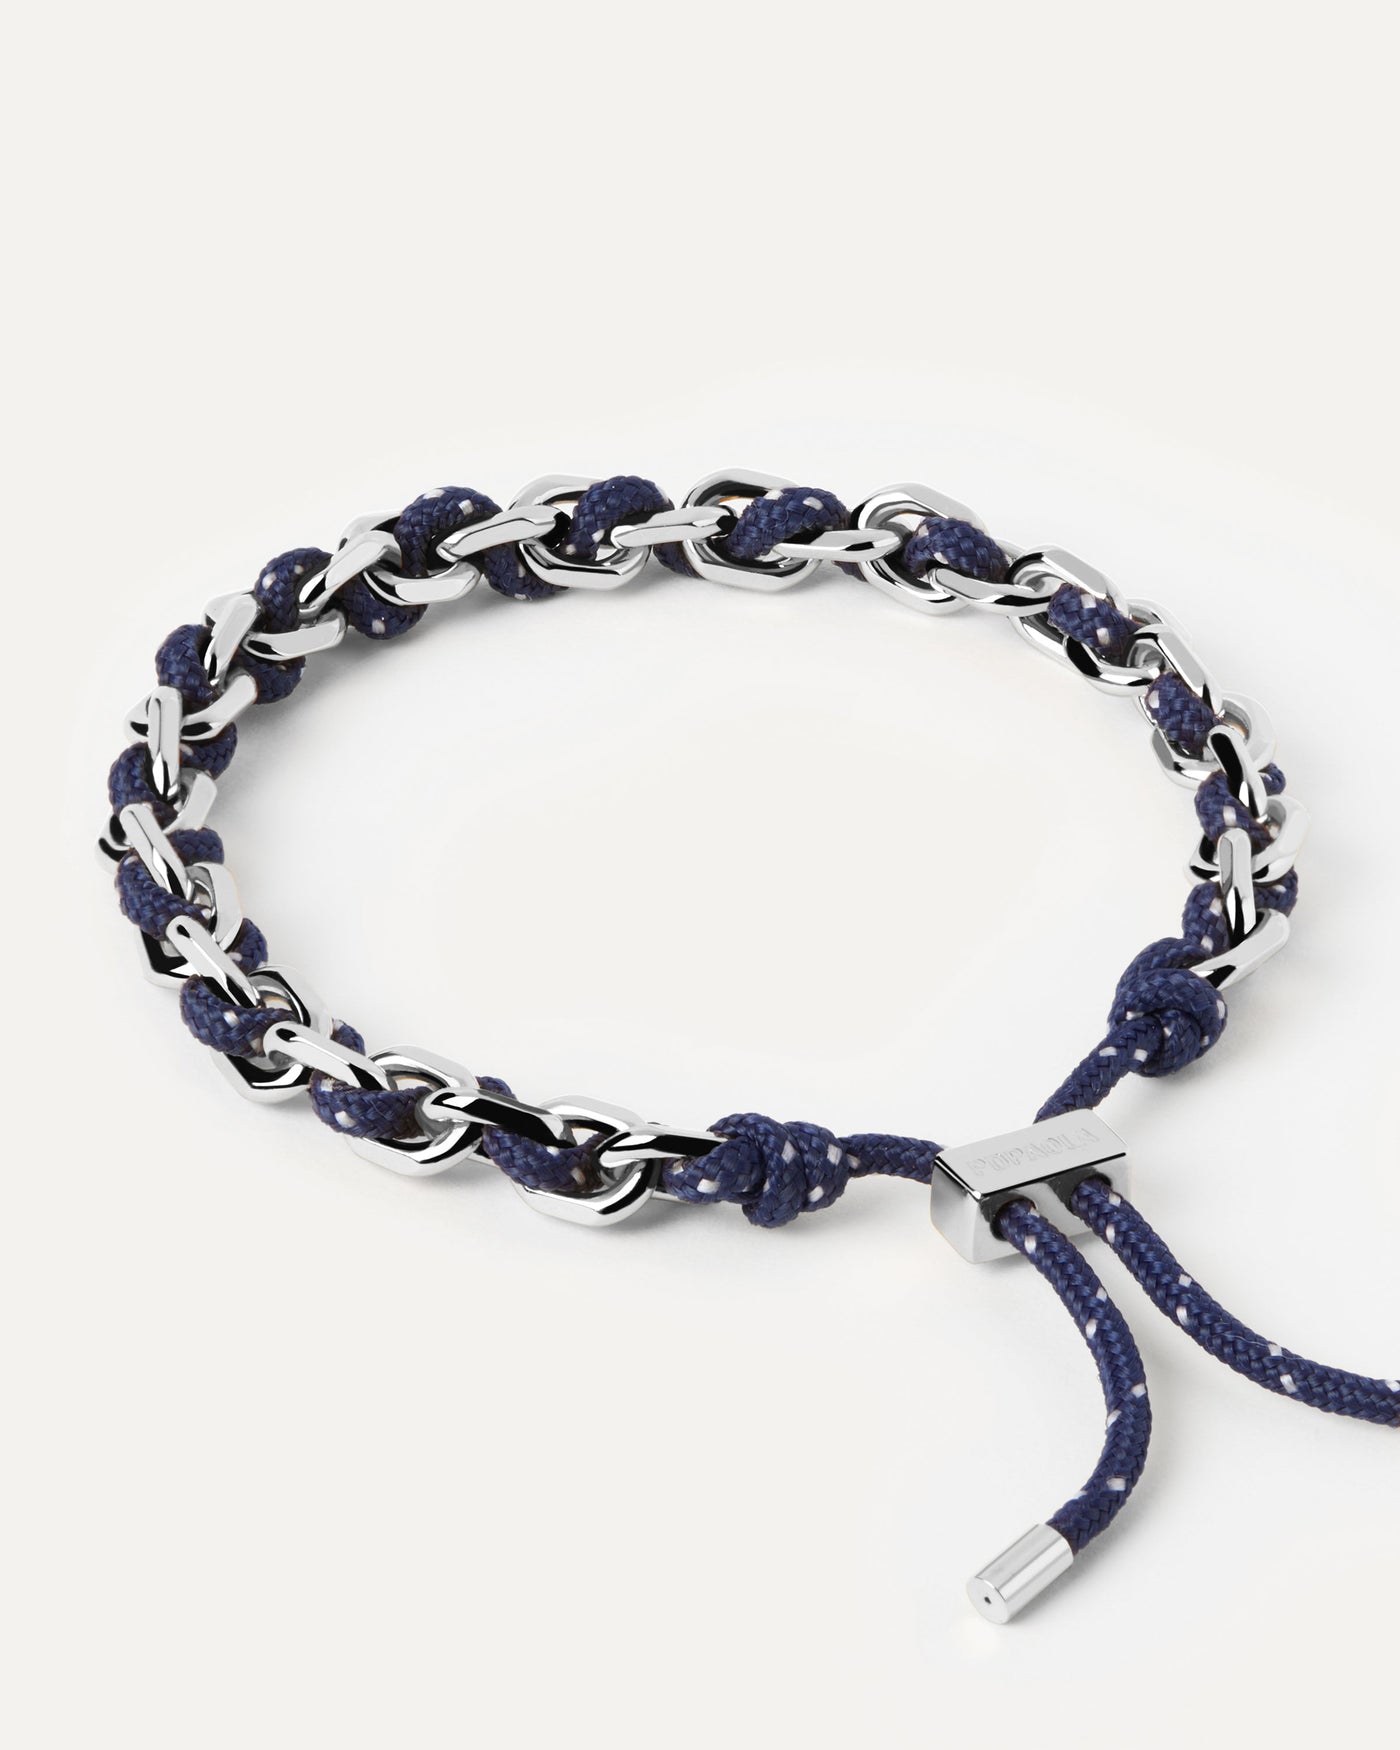 2023 Selection | Midnight Rope and Chain Silver Bracelet. Silver chain bracelet with a navy blue rope adjustable sliding clasp. Get the latest arrival from PDPAOLA. Place your order safely and get this Best Seller. Free Shipping.